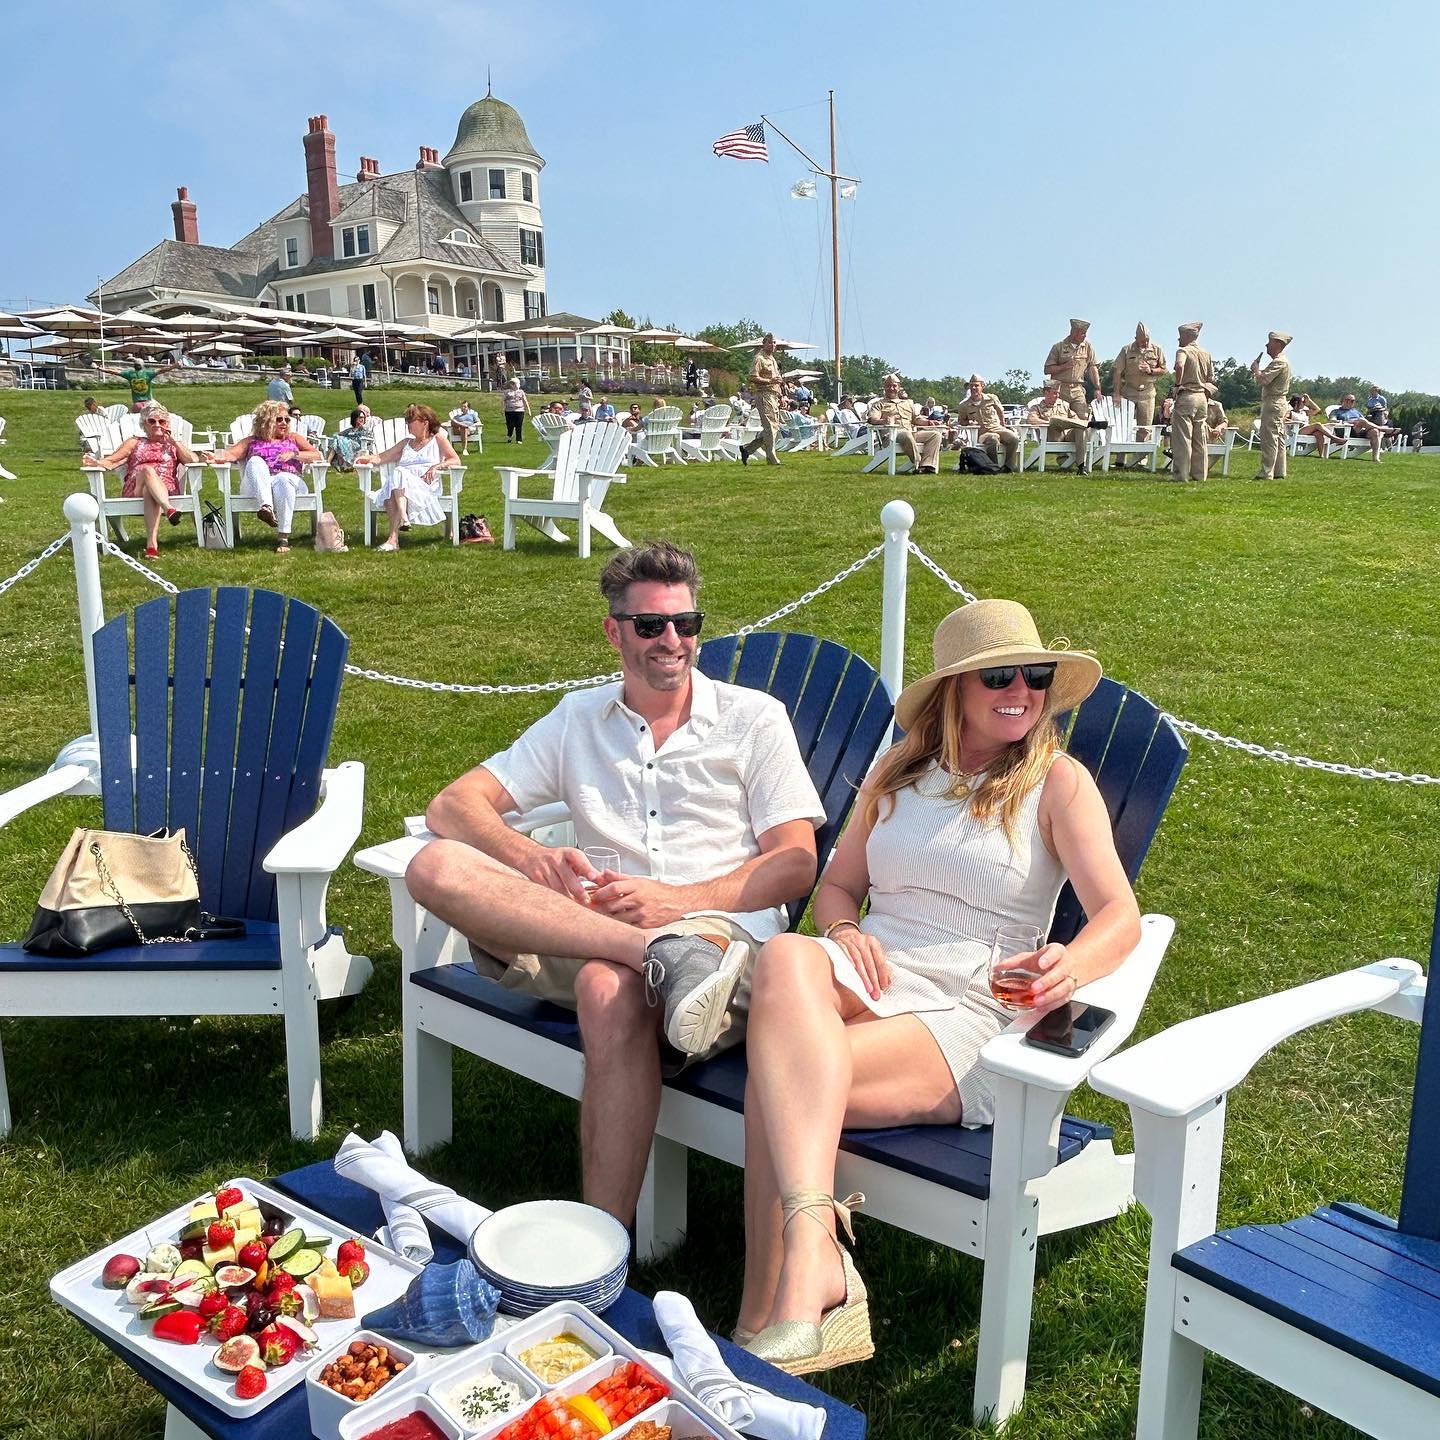 Guest enjoying the Adirondack Chairs on the lawn, Castle Hill Inn in Back ground